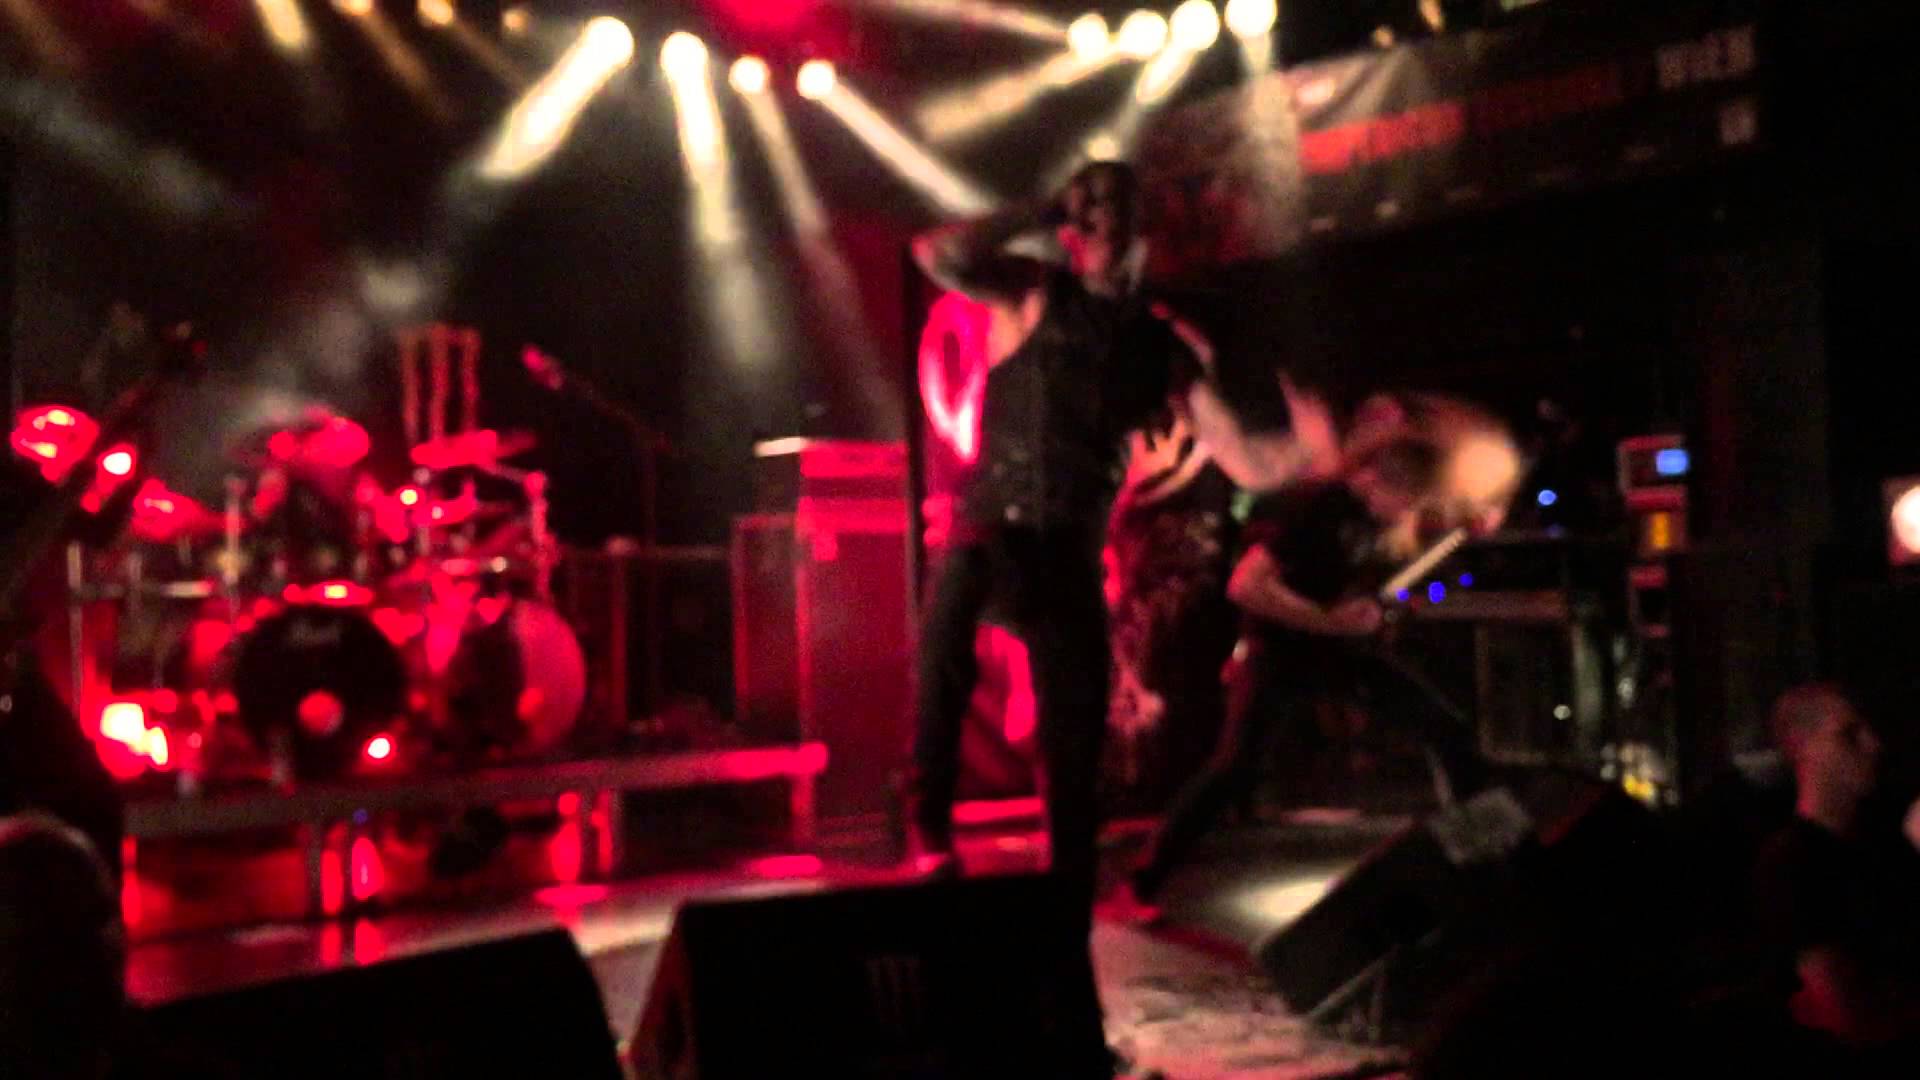 Carnifex - Lie to my face @ impericon fest wien 2015